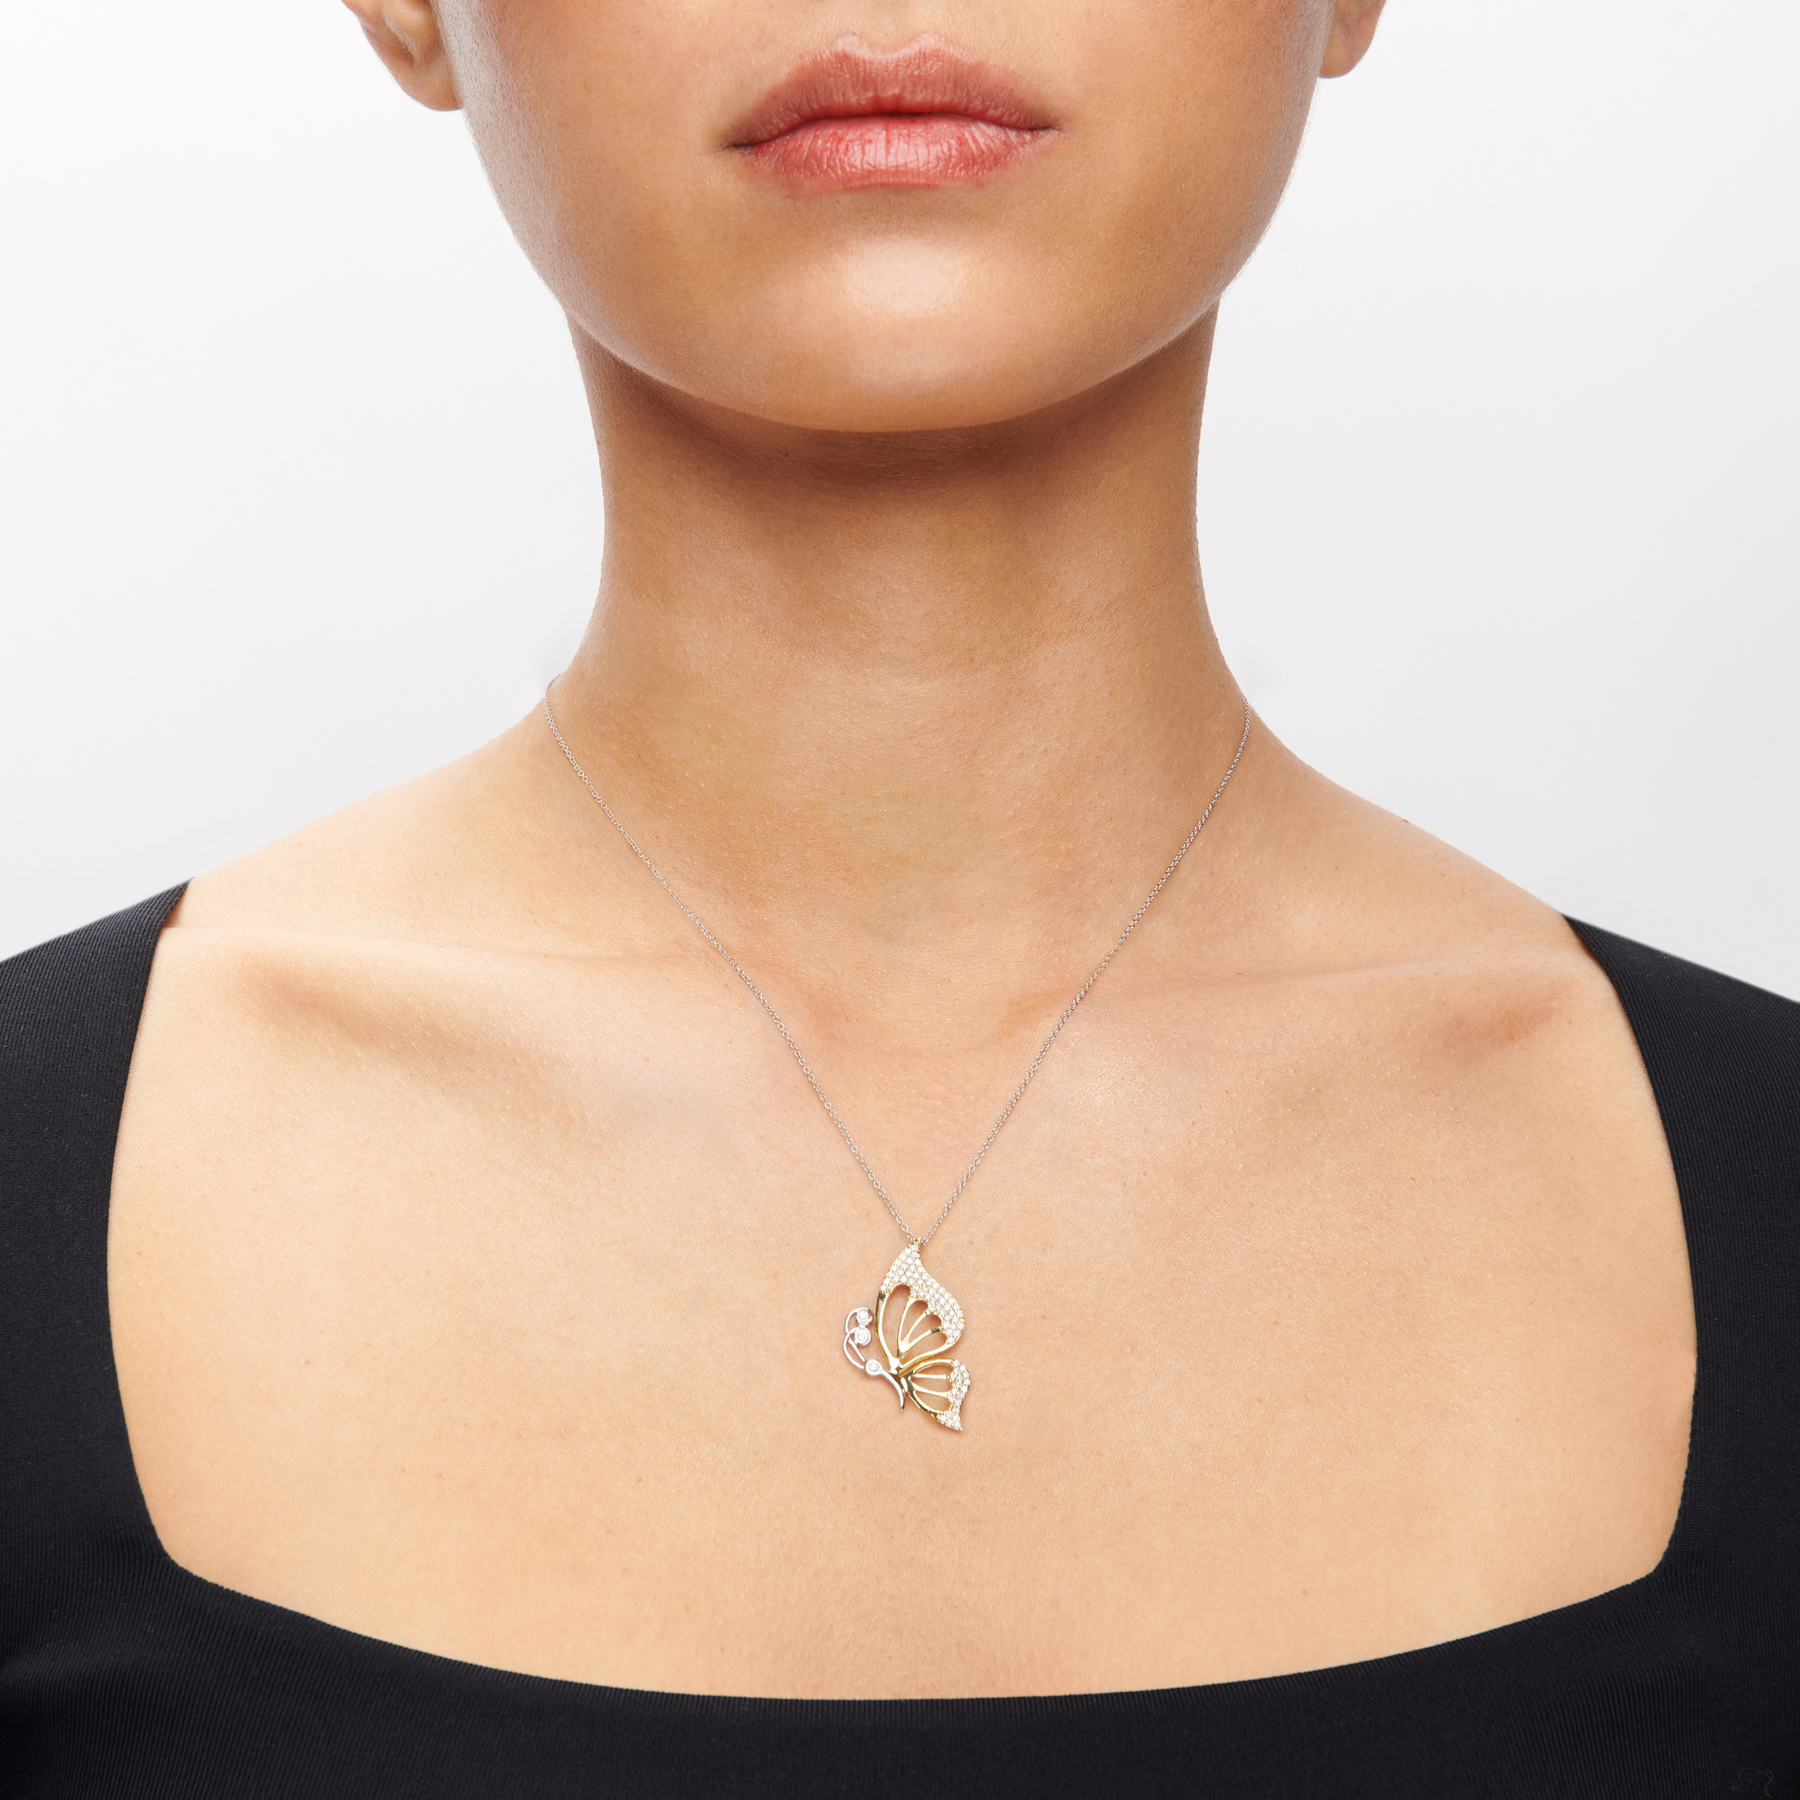 Butterfly Pendant Necklace in 18K Gold with Diamonds LP4815